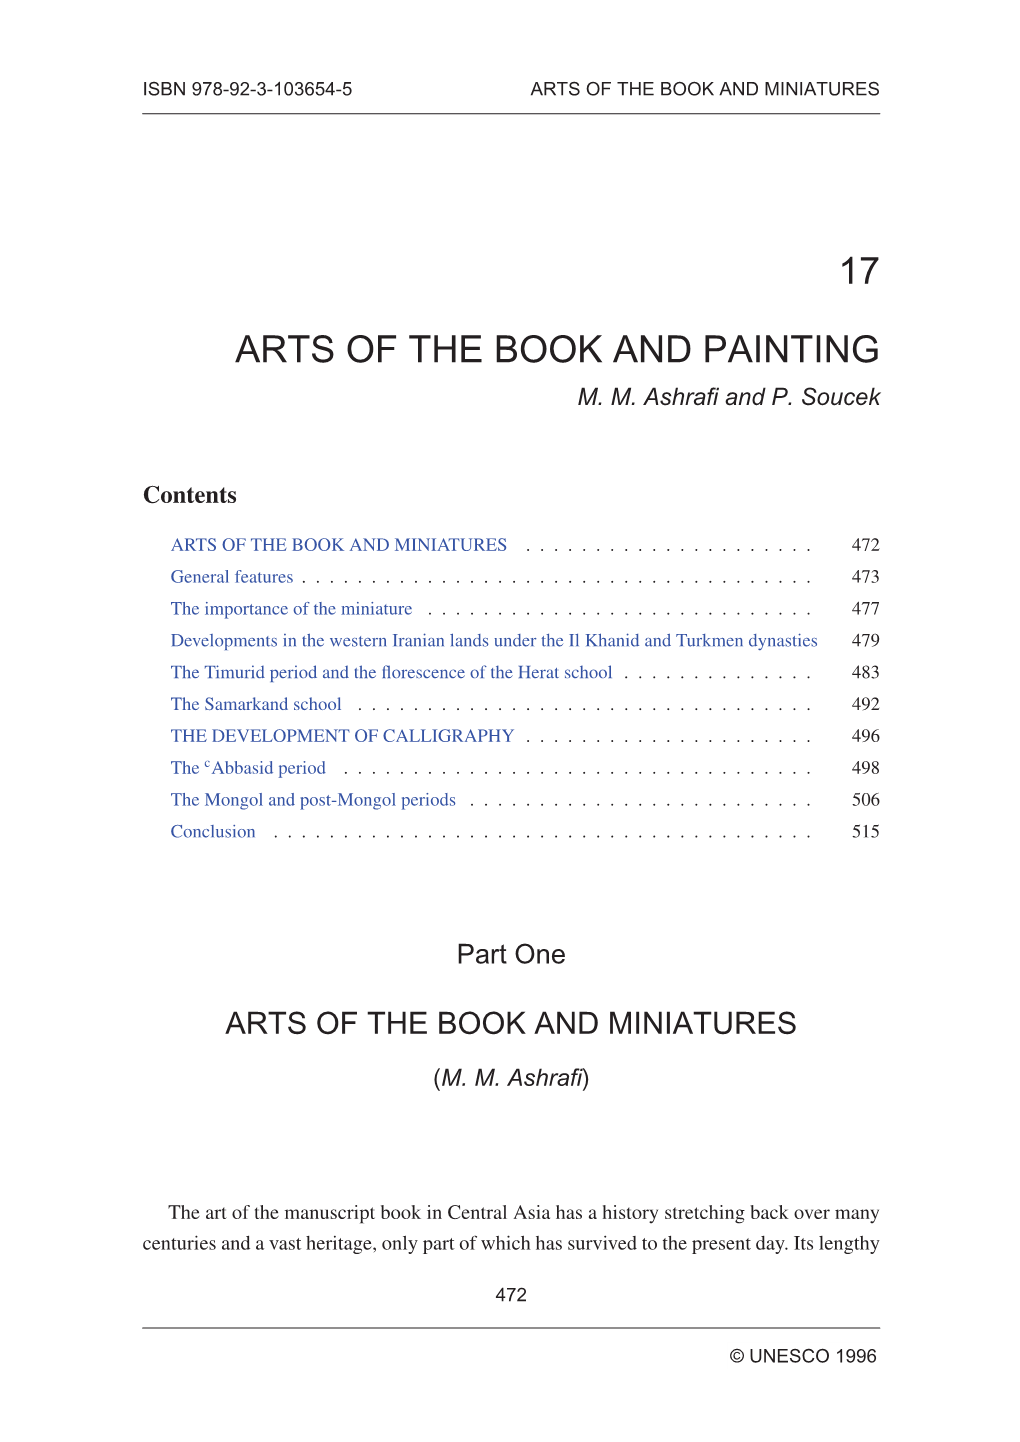 17 Arts of the Book and Painting